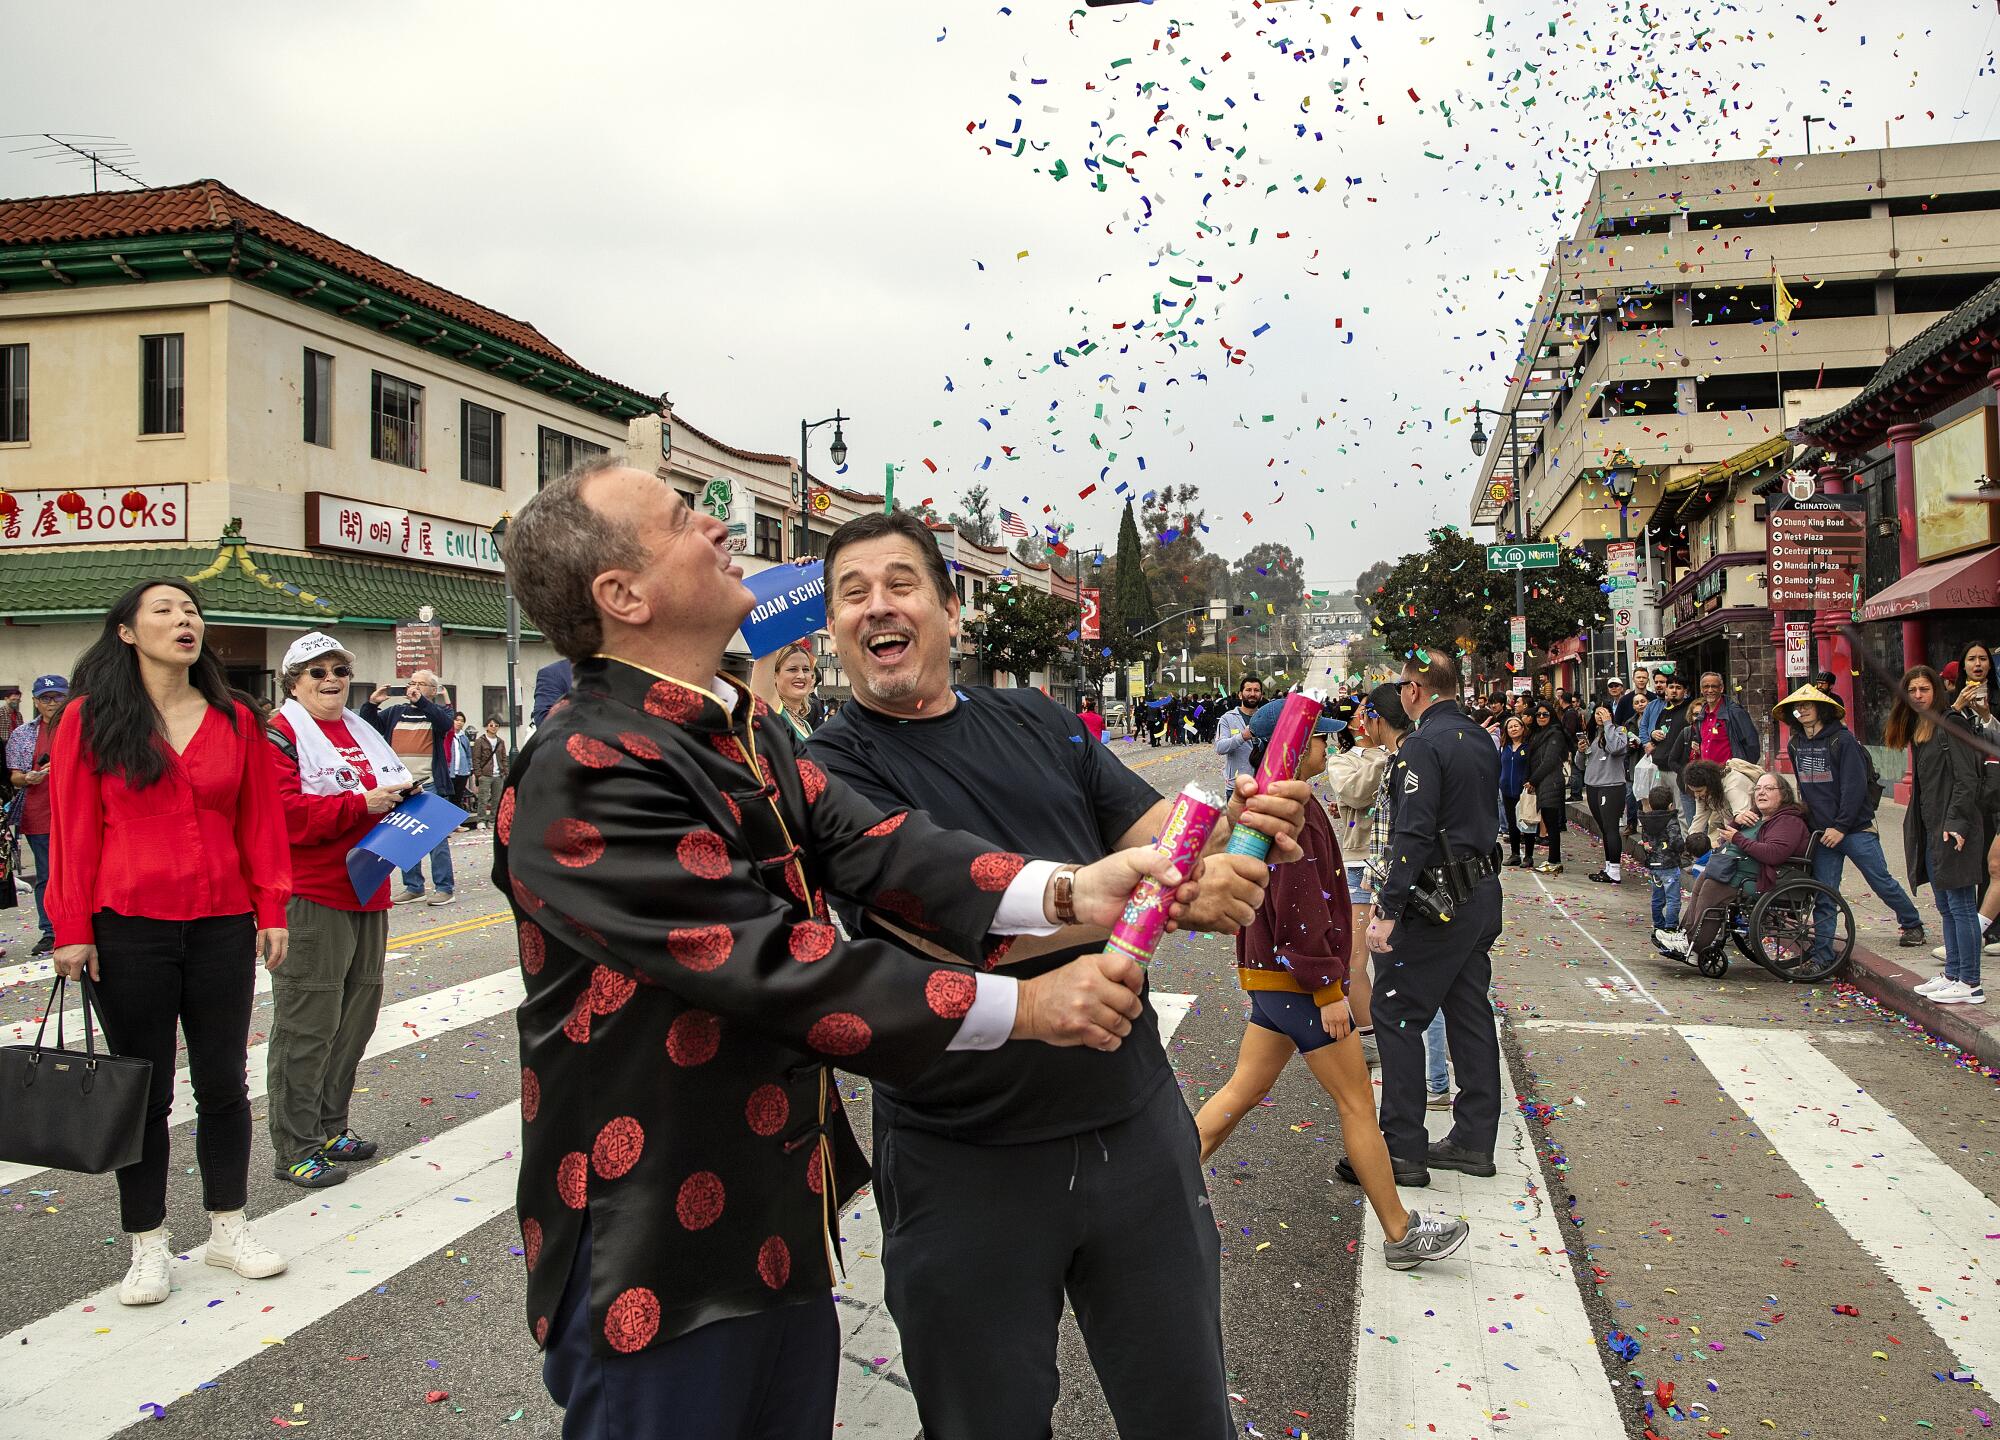 Adam Schiff, in a Chinese jacket, releases confetti into the air from a tube with another man in the street as others watch